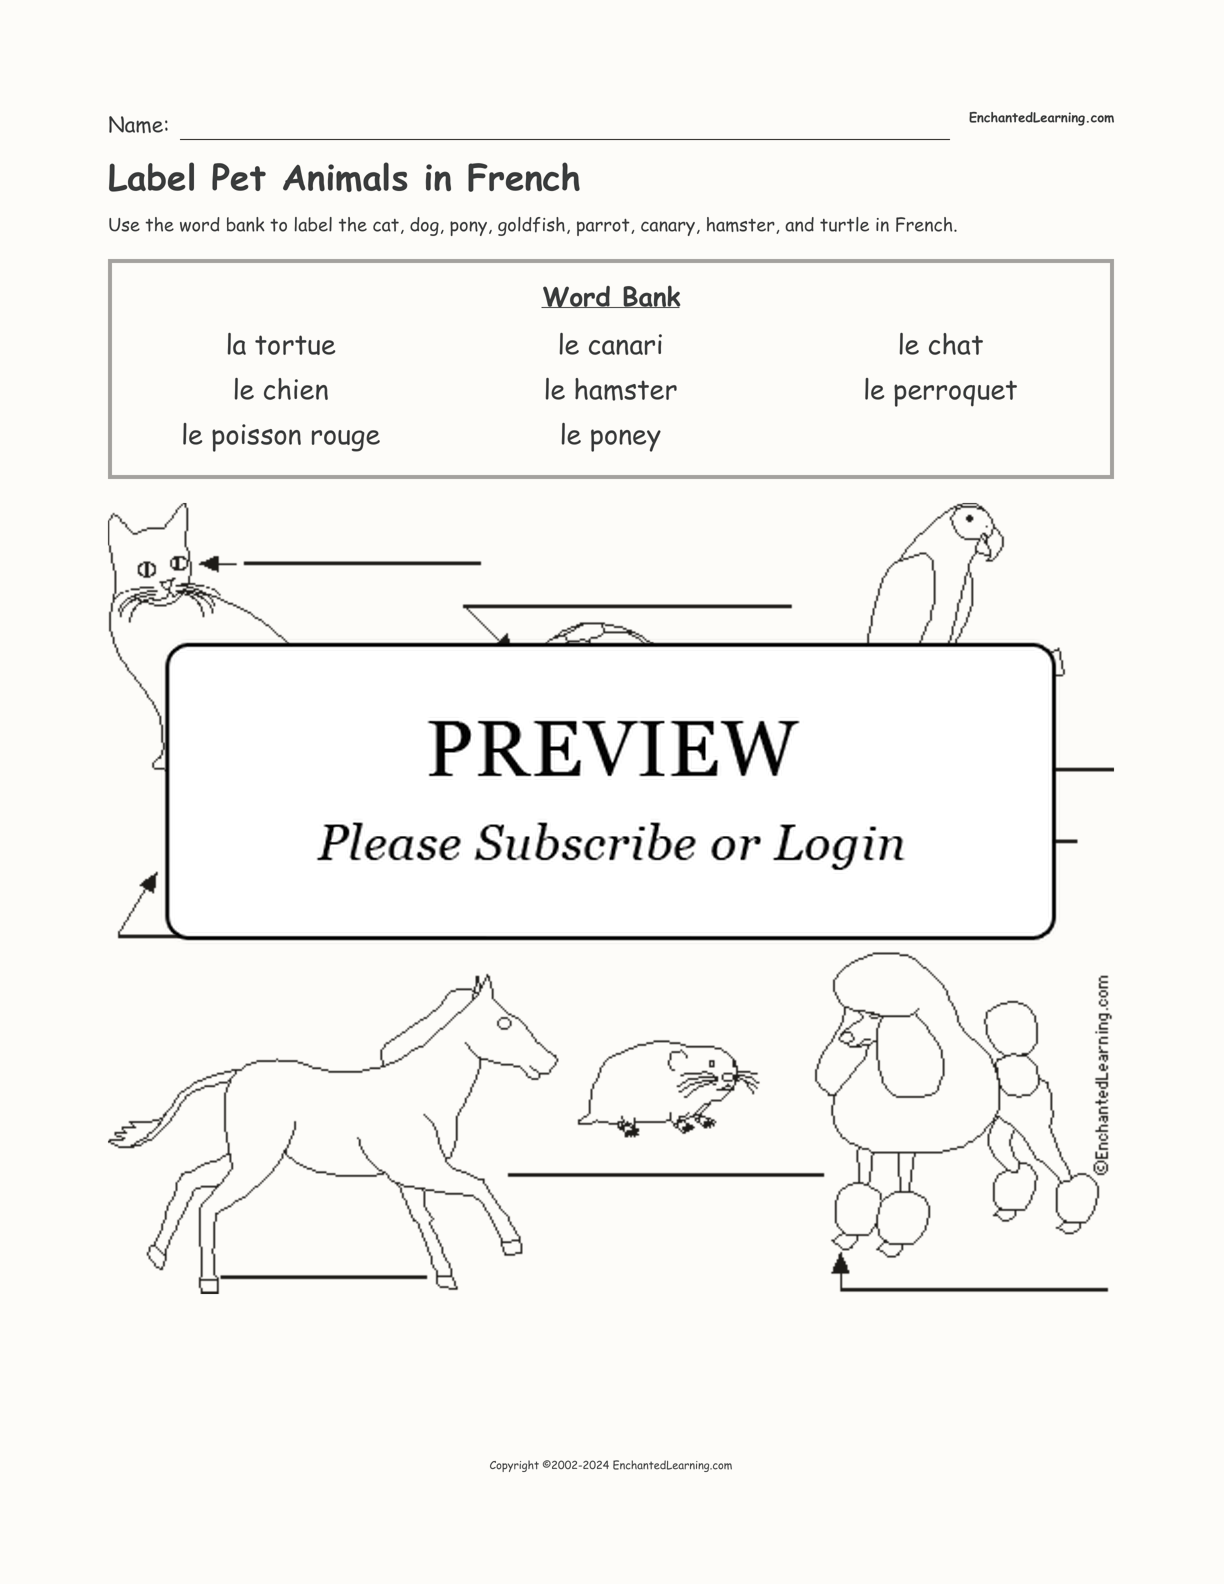 Label Pet Animals in French interactive worksheet page 1